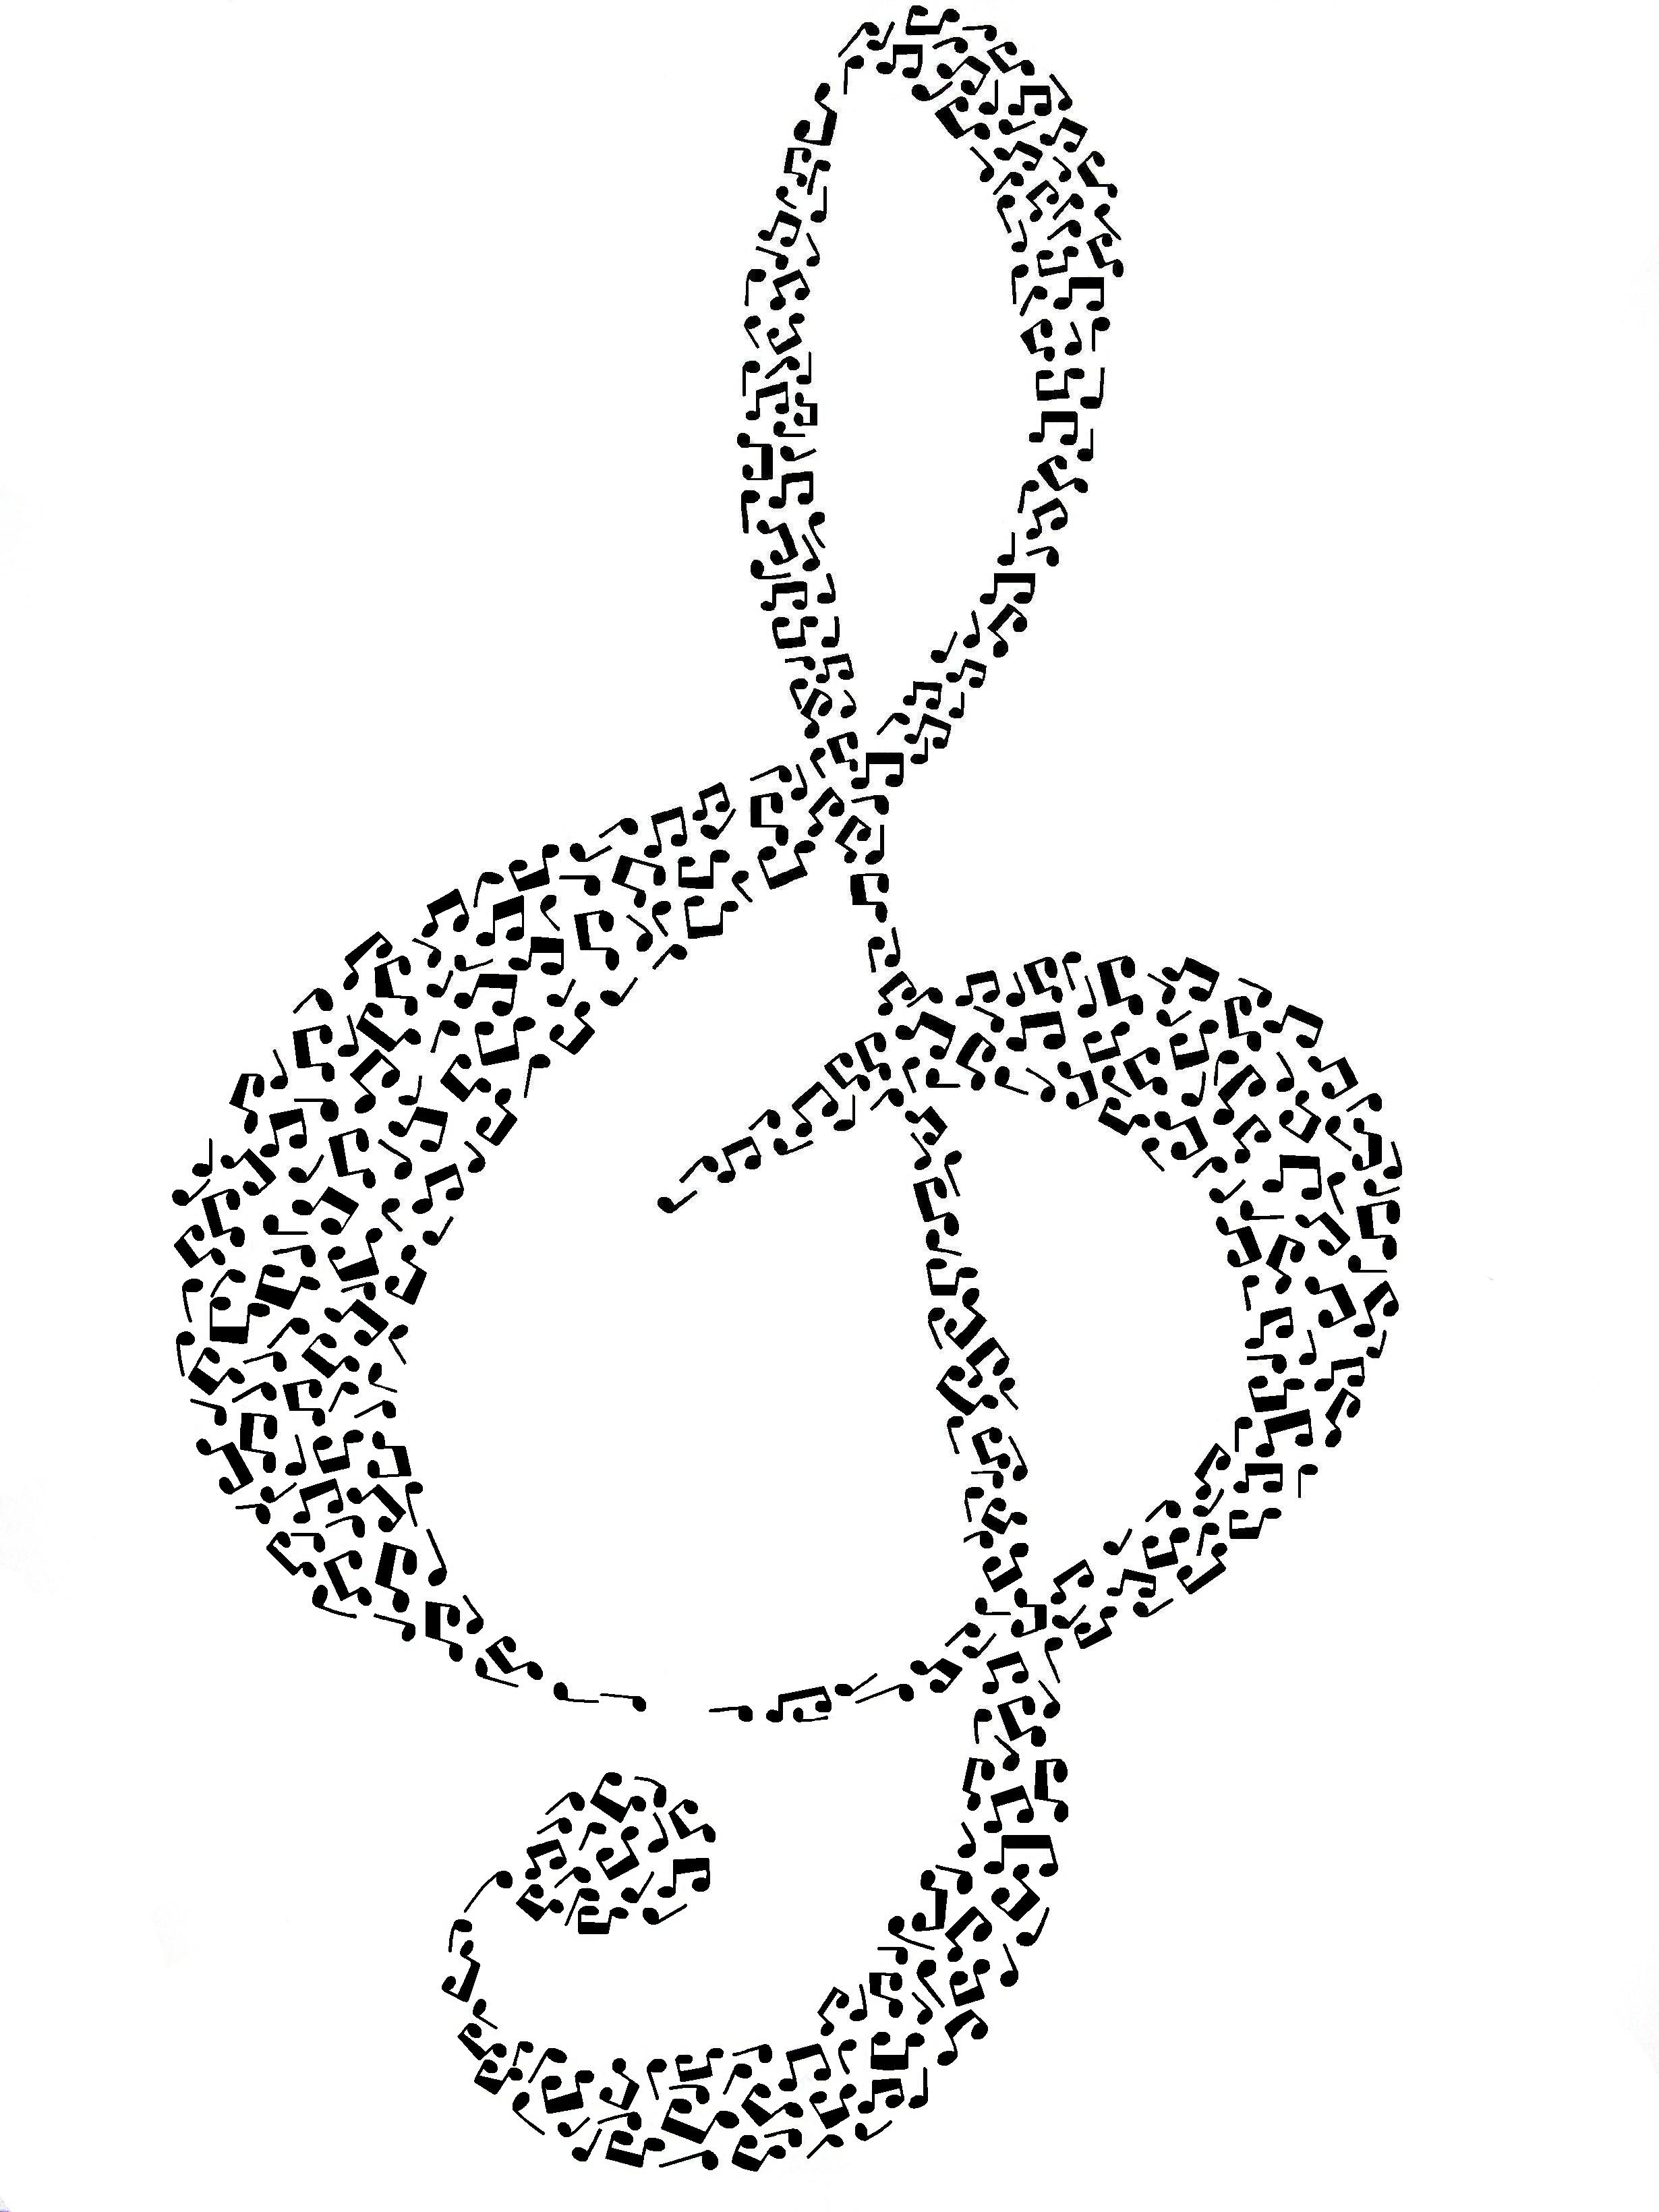 Free Music Note Drawings Download Free Clip Art Free Clip Art On Clipart Library Music drawings easy cool hd amazing ideas picture simple tumblr gif. clipart library